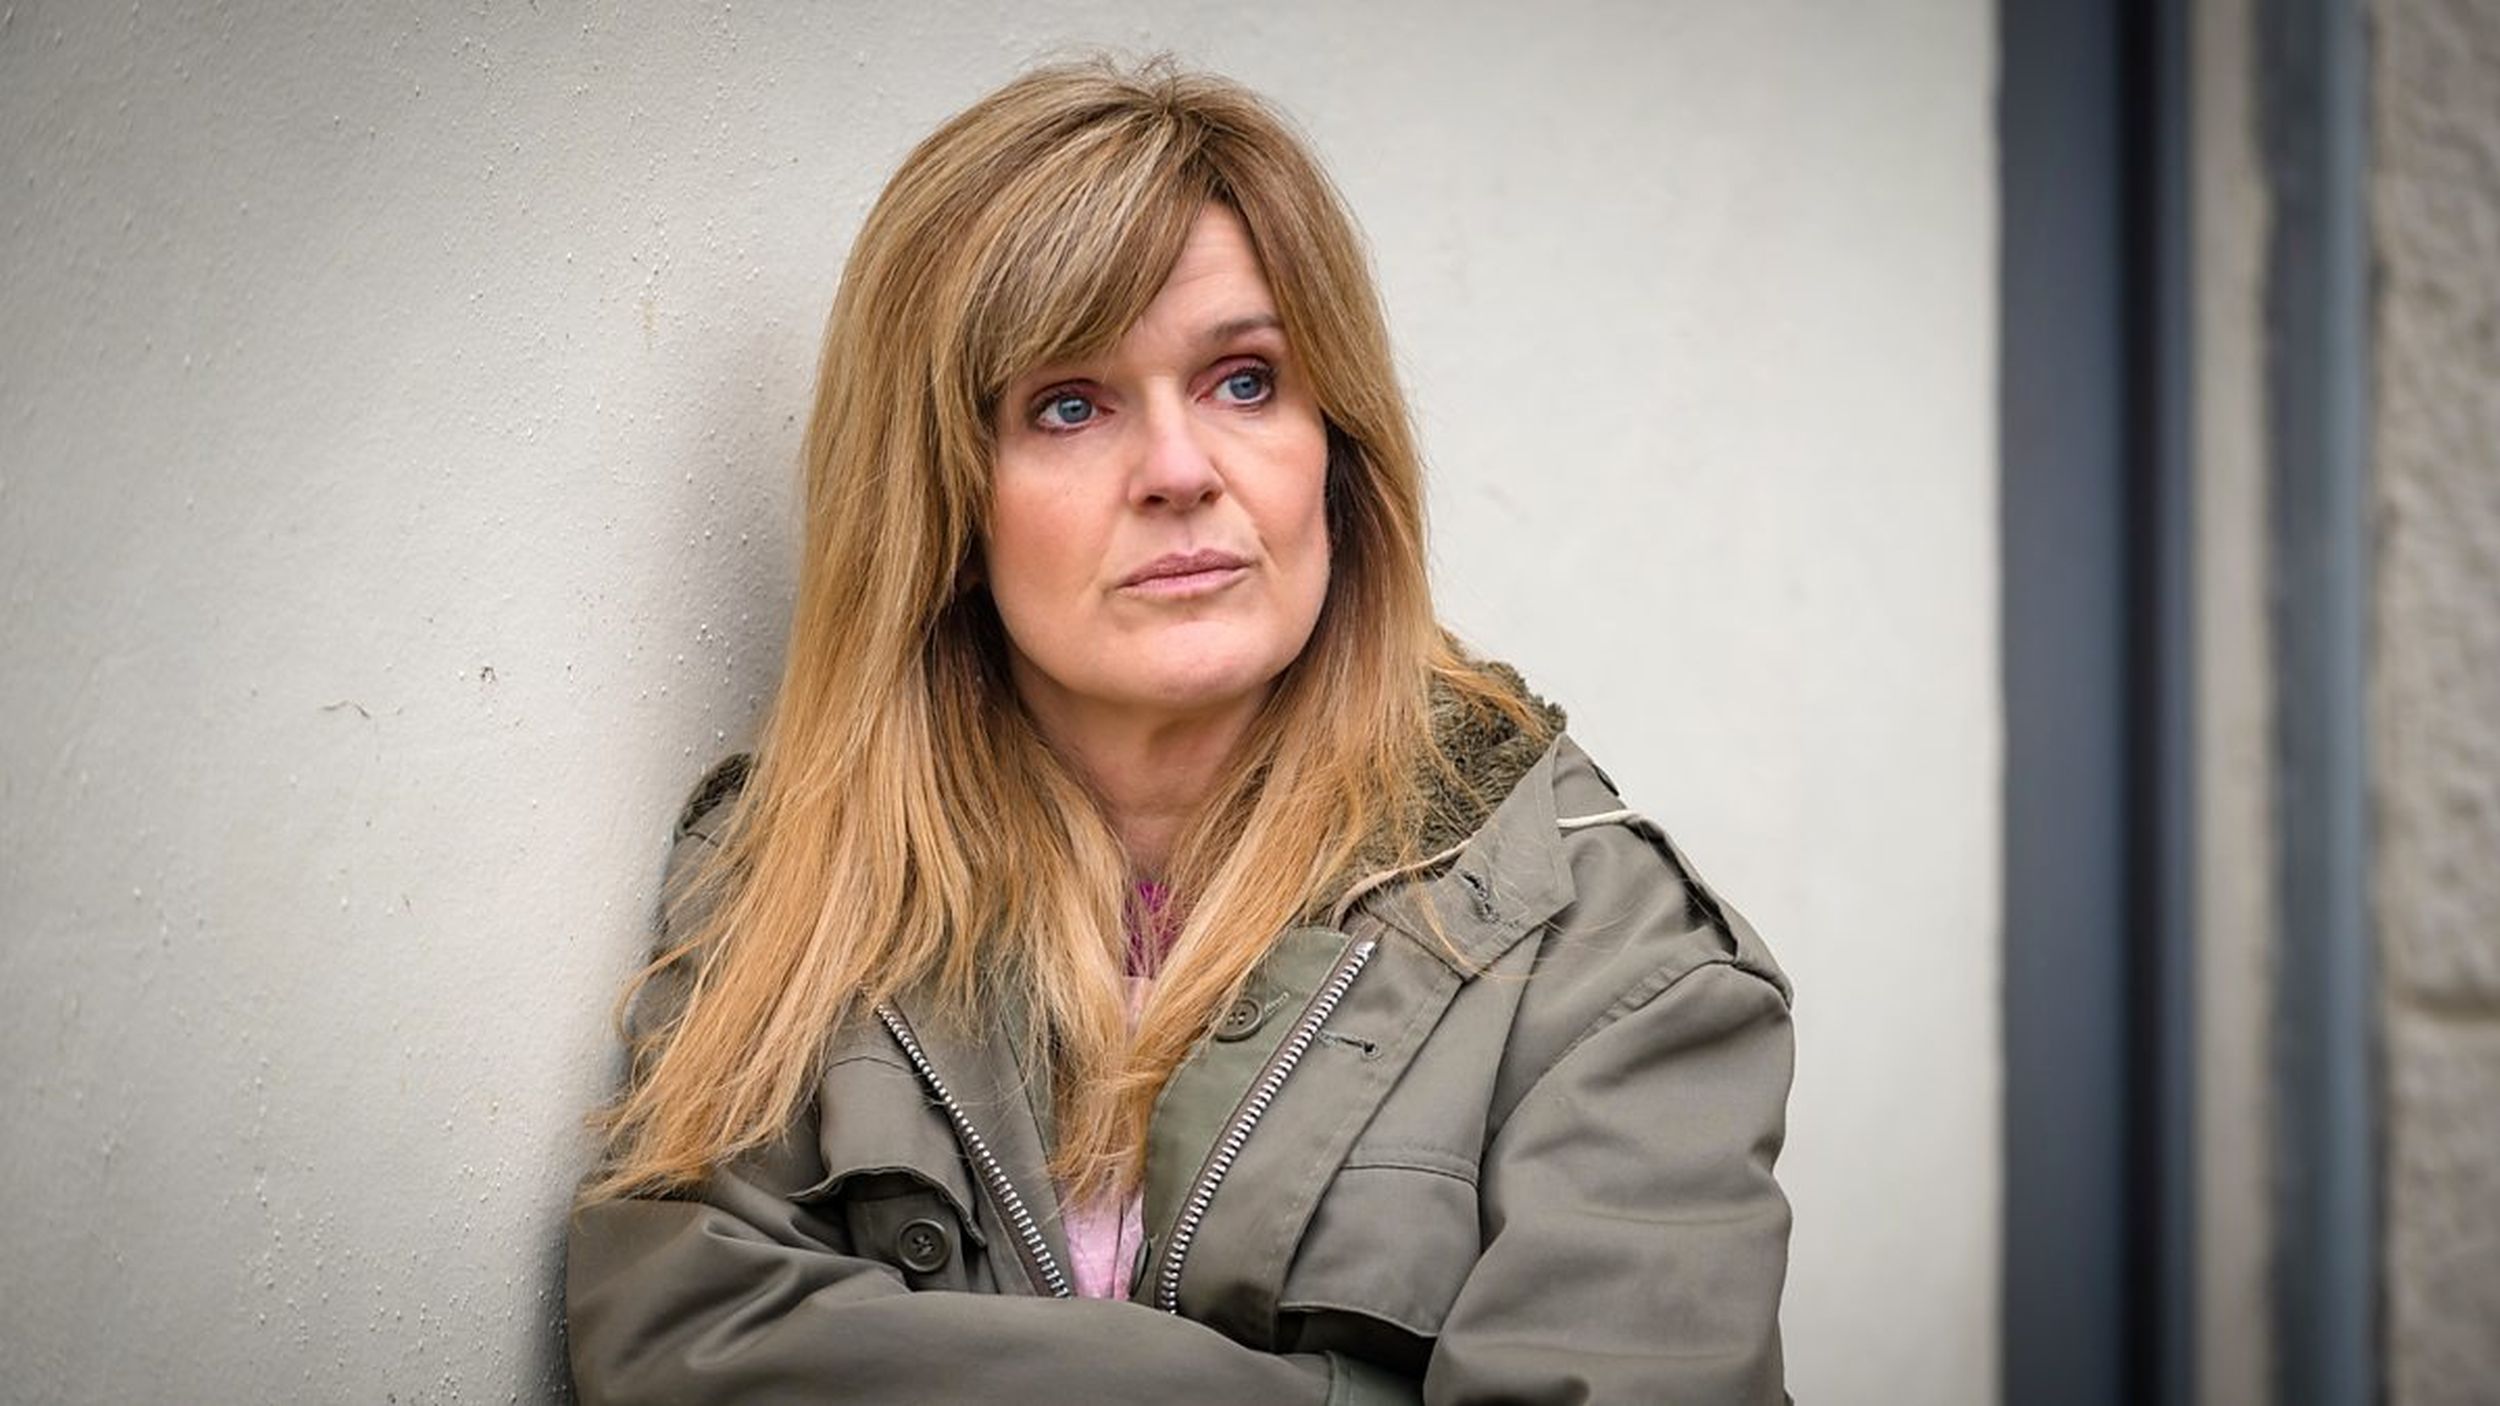 Siobhan Finneran as Catherine's sister, Clare Cartwright, leaning against a wall at the police station 'Happy Valley' Season 1 